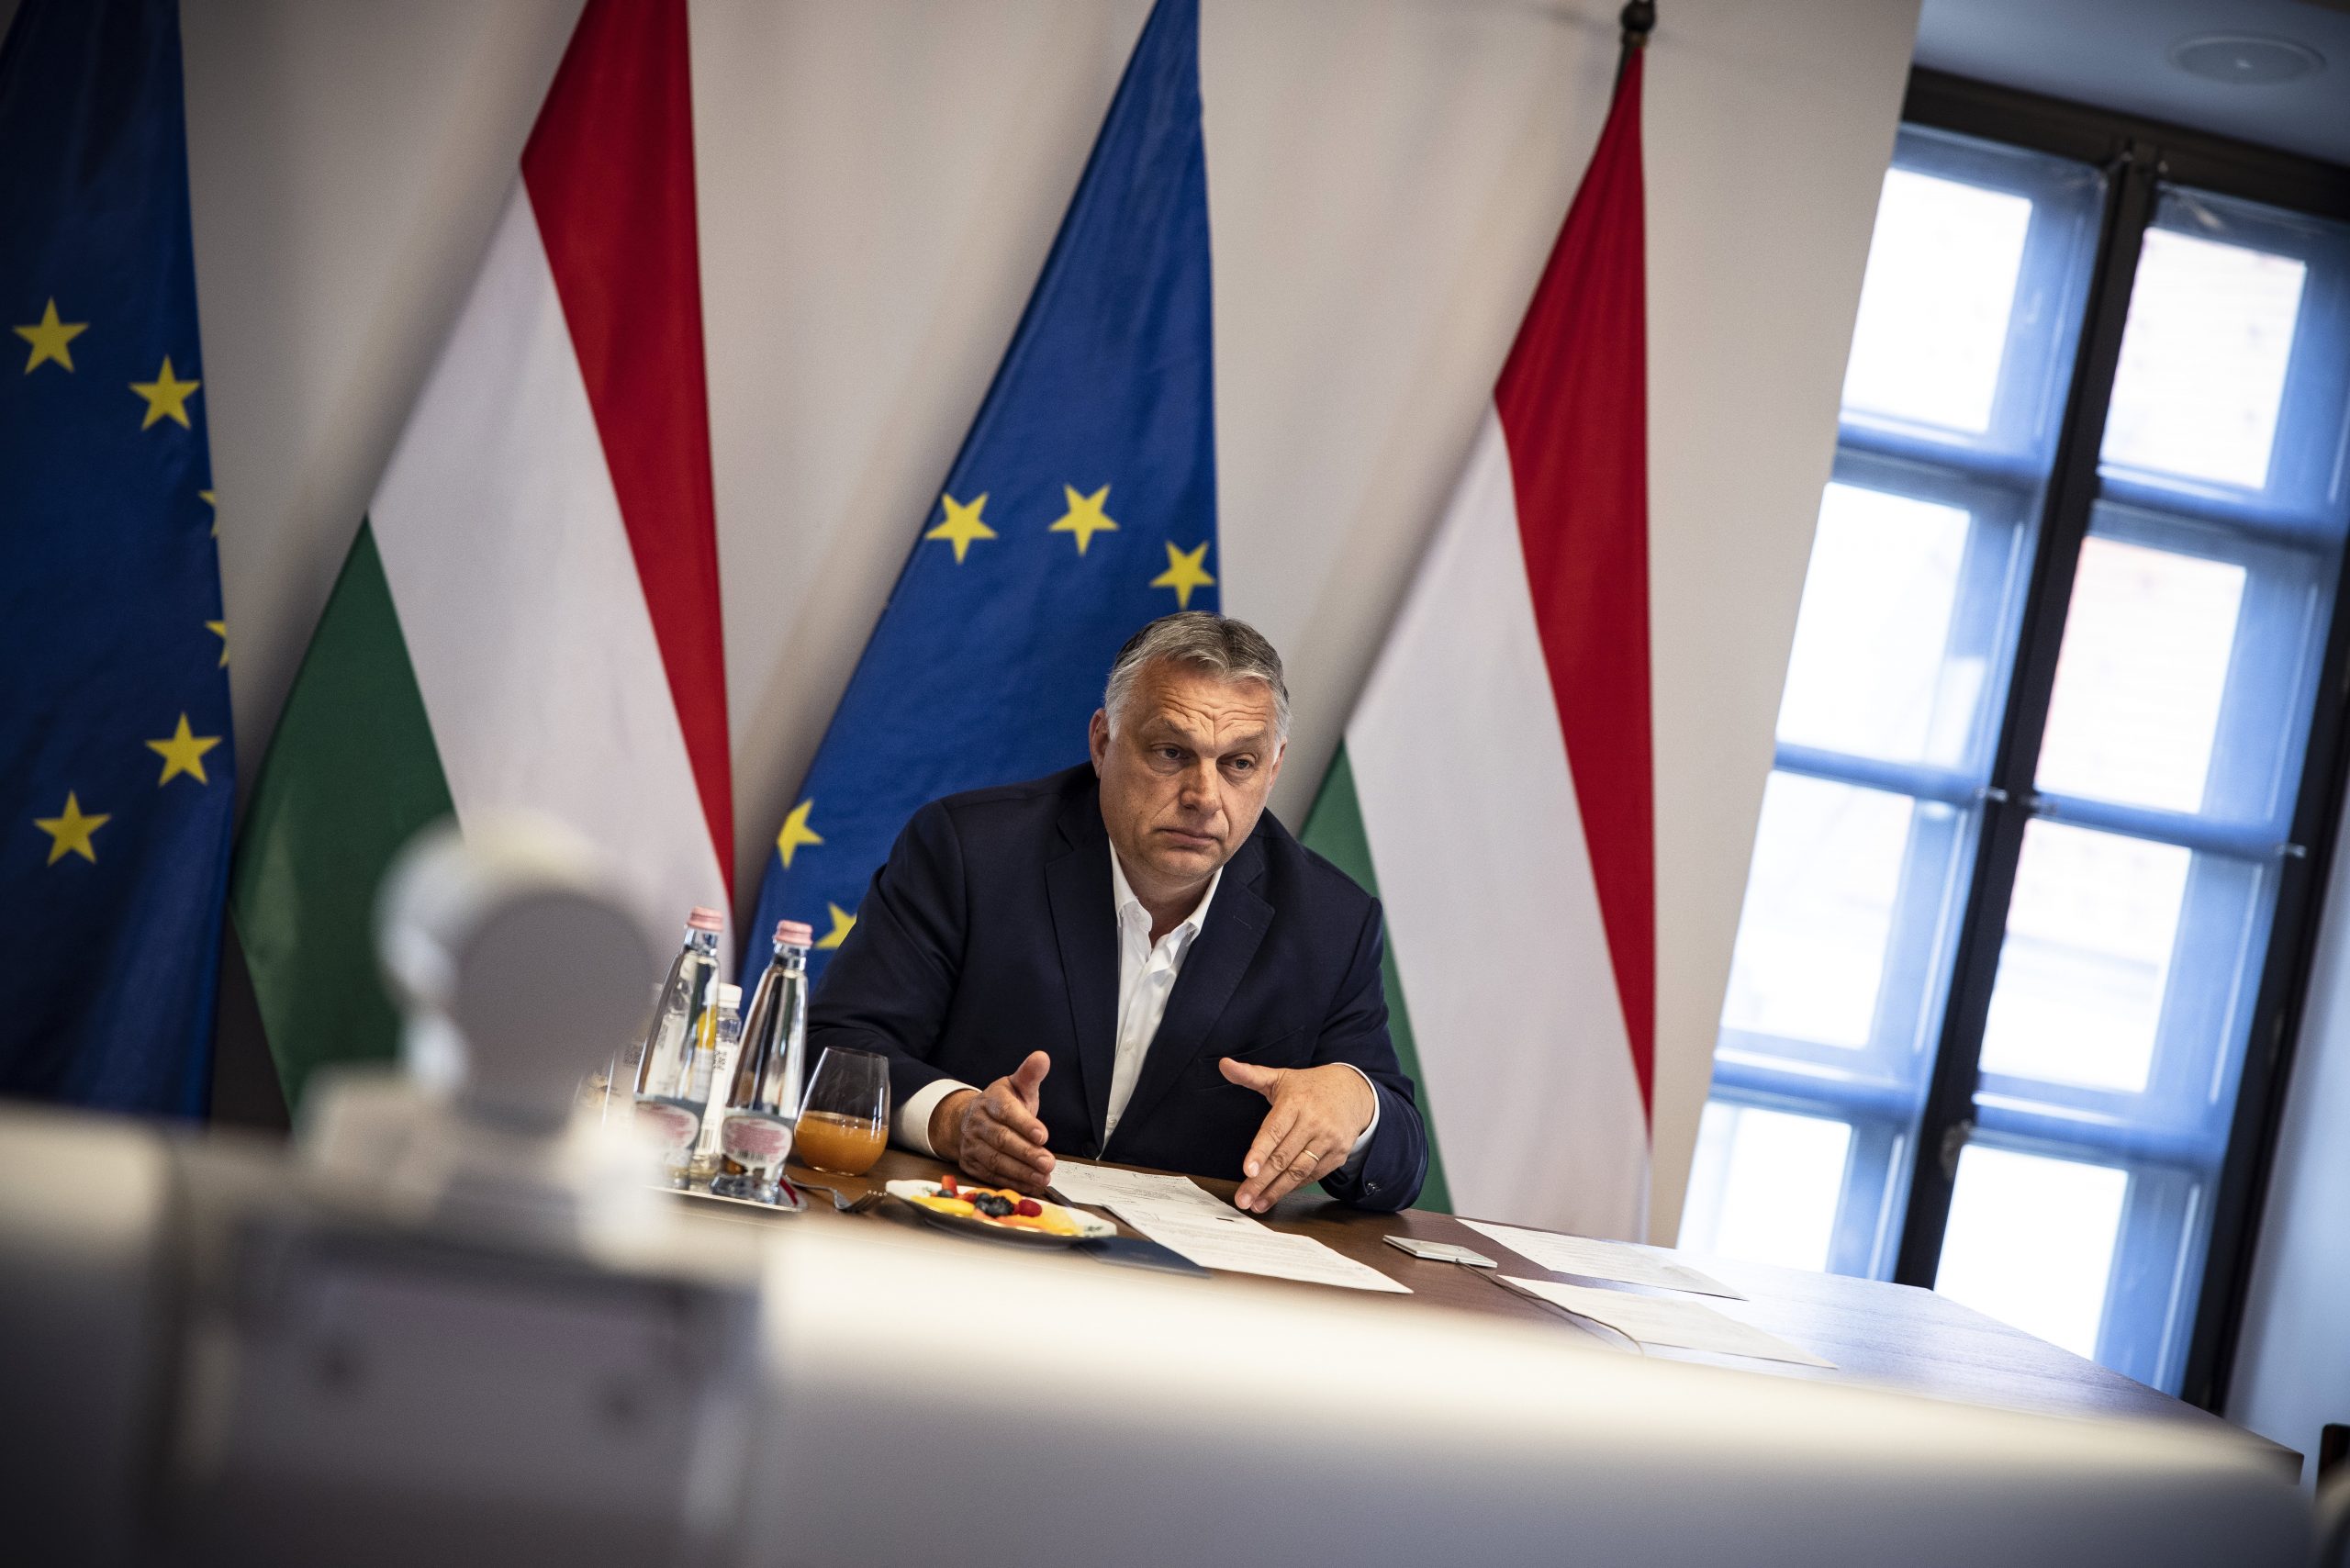 Orbán Proposes Leaving Latest Sanctions Package Off Next European Council Meeting's Agenda